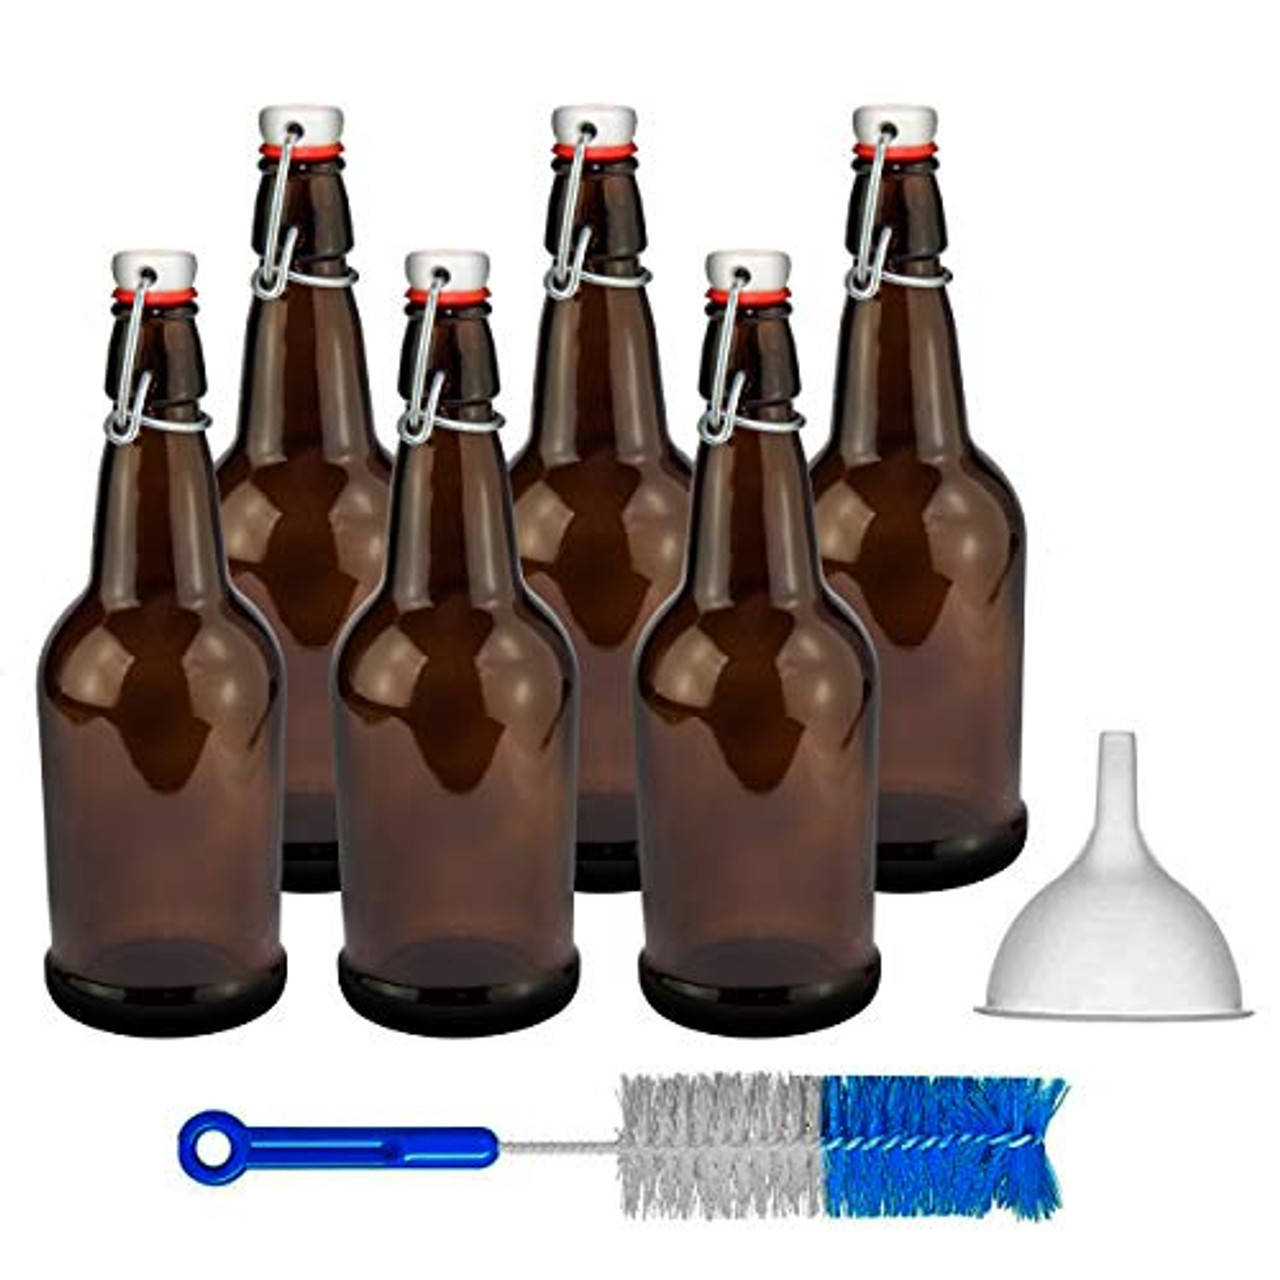 Glass Bottles with Swing Top Lids, Clear Glass Bottles for Home Brewing,  Kombucha, Beer, and Other Liquor,16 Ounce, 12 Pack by Chef's Star